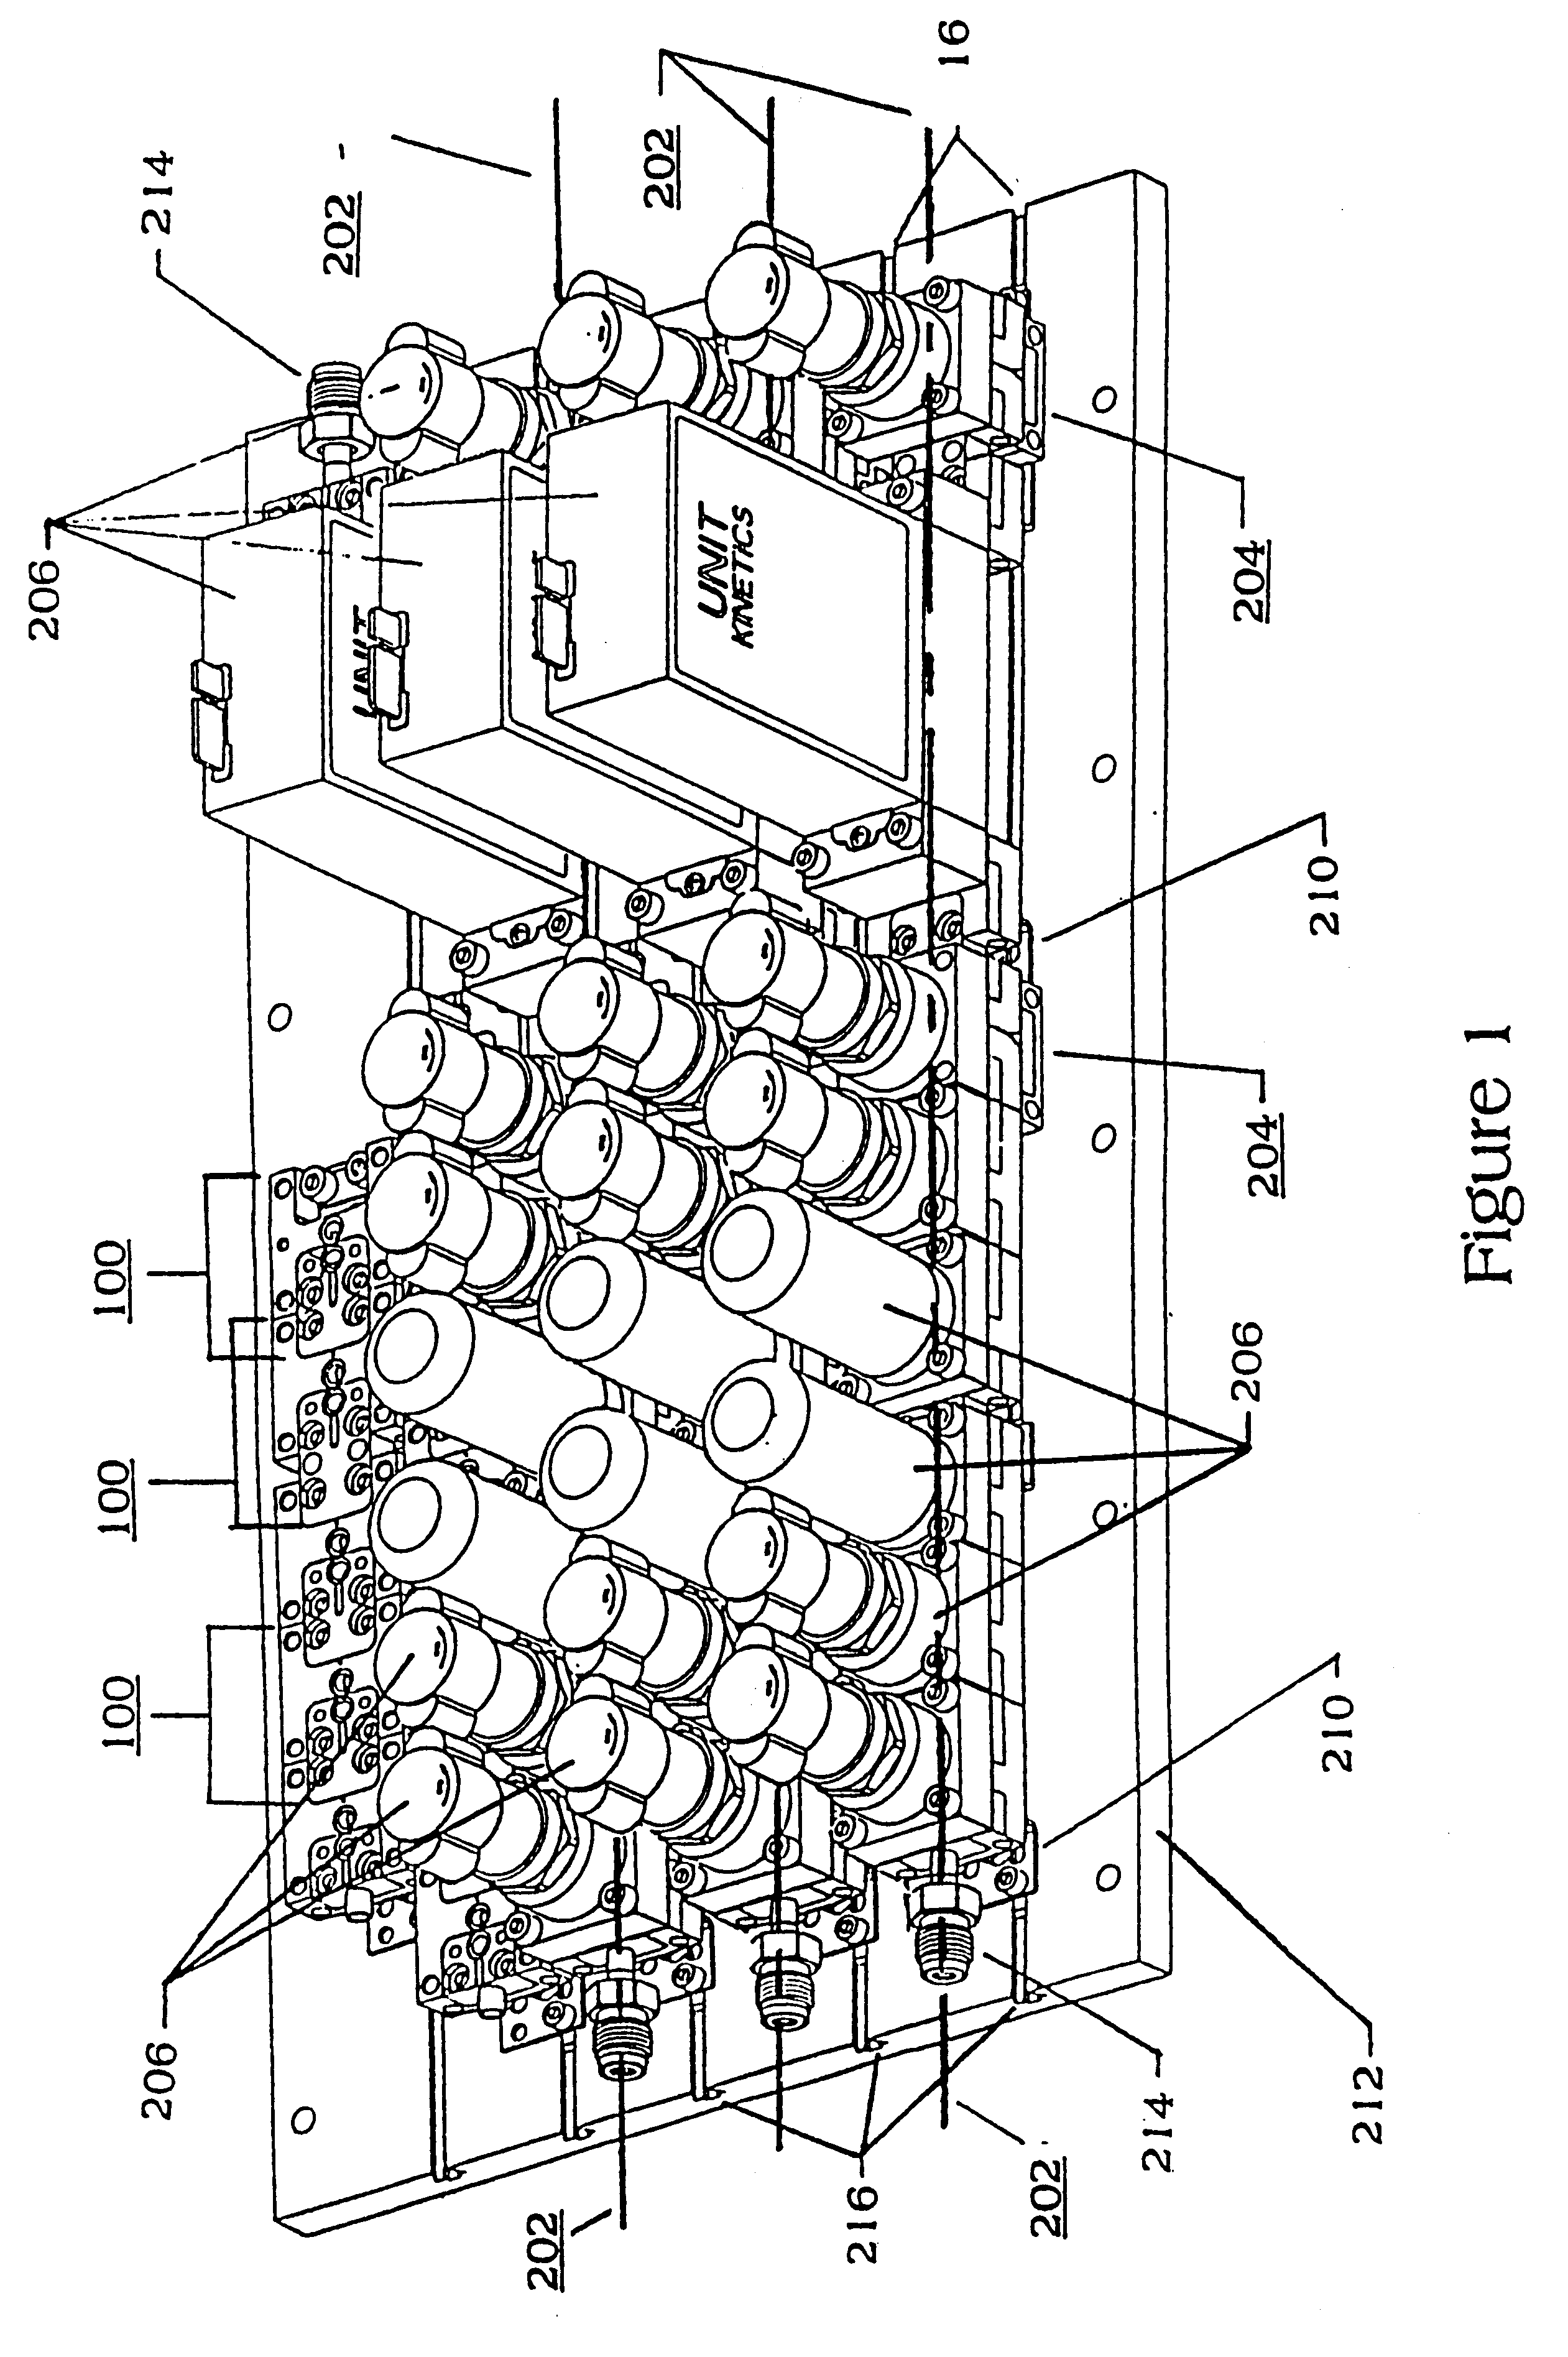 System of modular substrates for enabling the distribution of process fluids through removable components